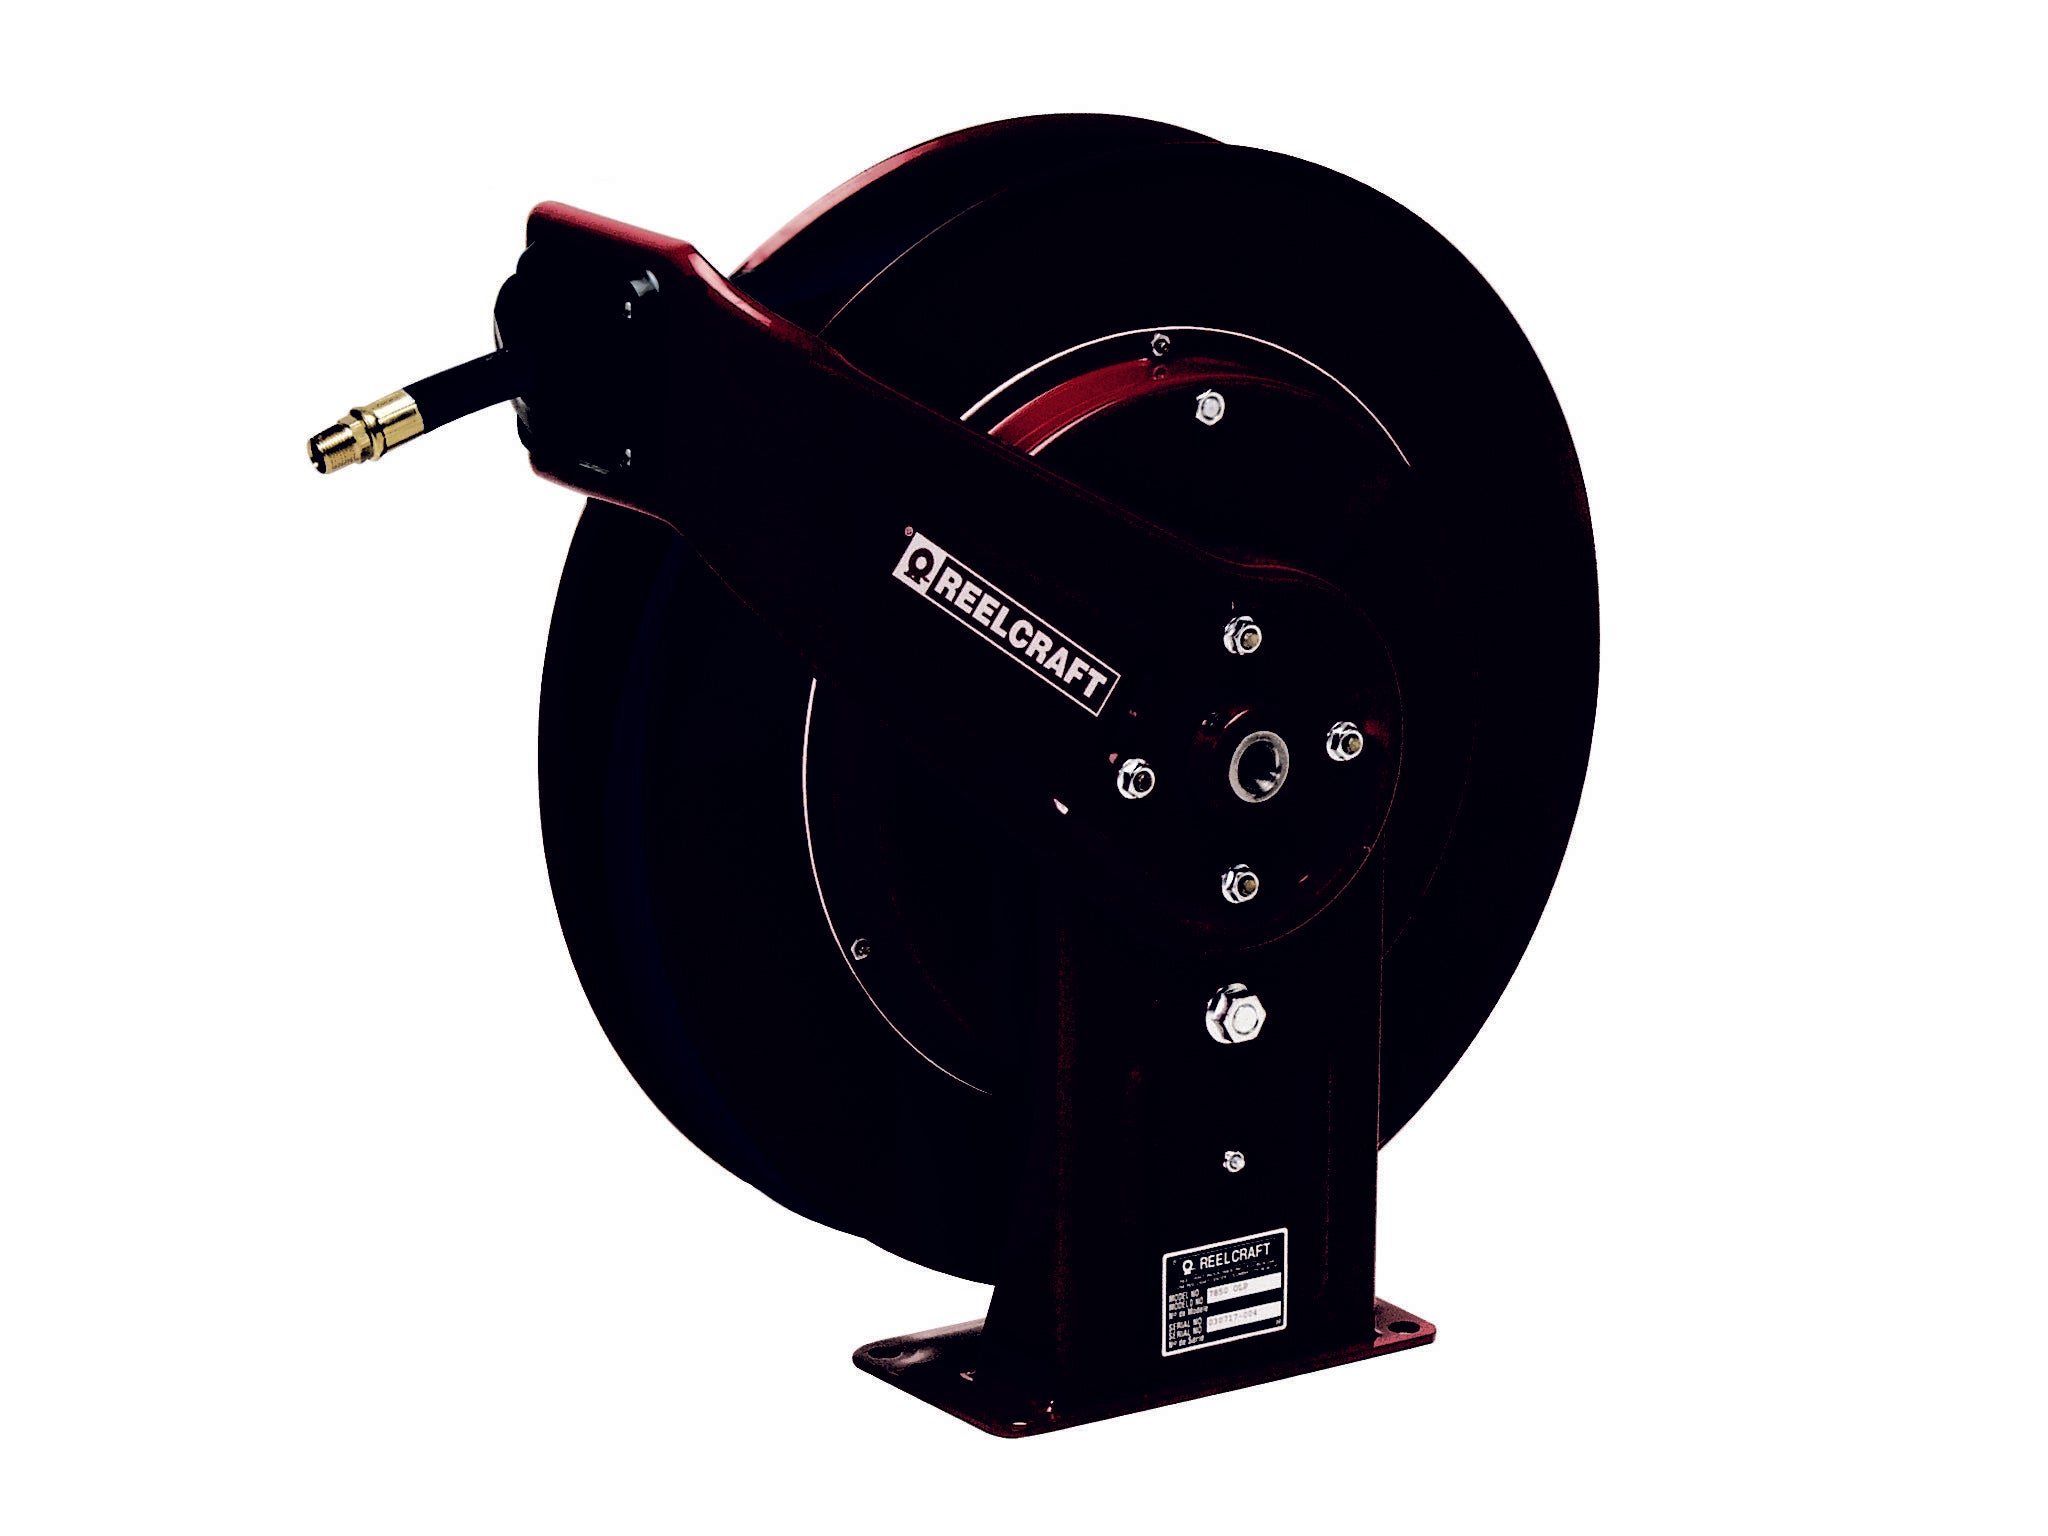 Reelcraft PW81000 OHP Retractable Hose Reel 3/8 x 100ft, 5000 psi